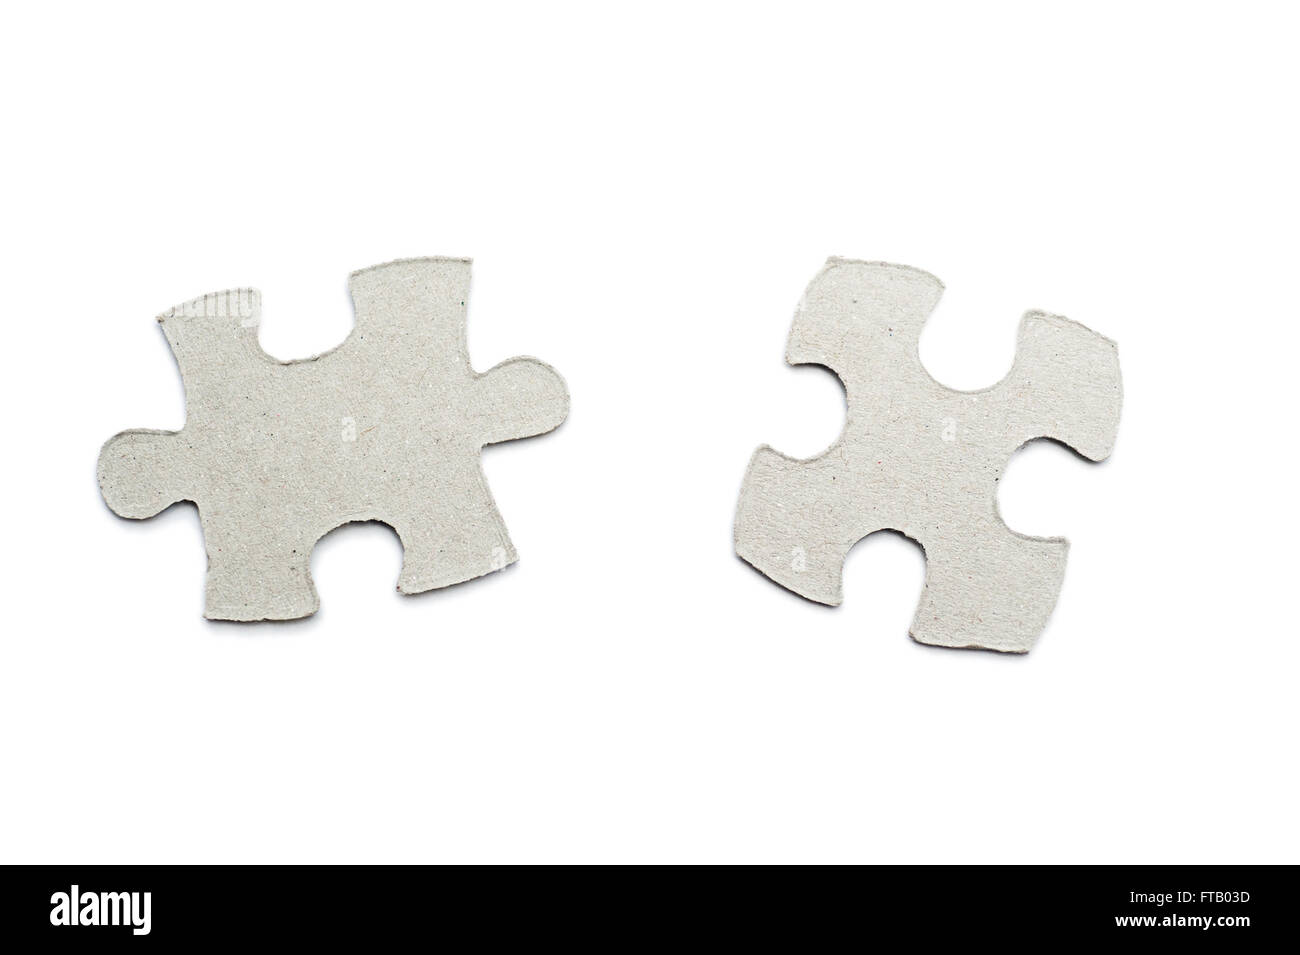 cardboard puzzles pieces on a white background Stock Photo